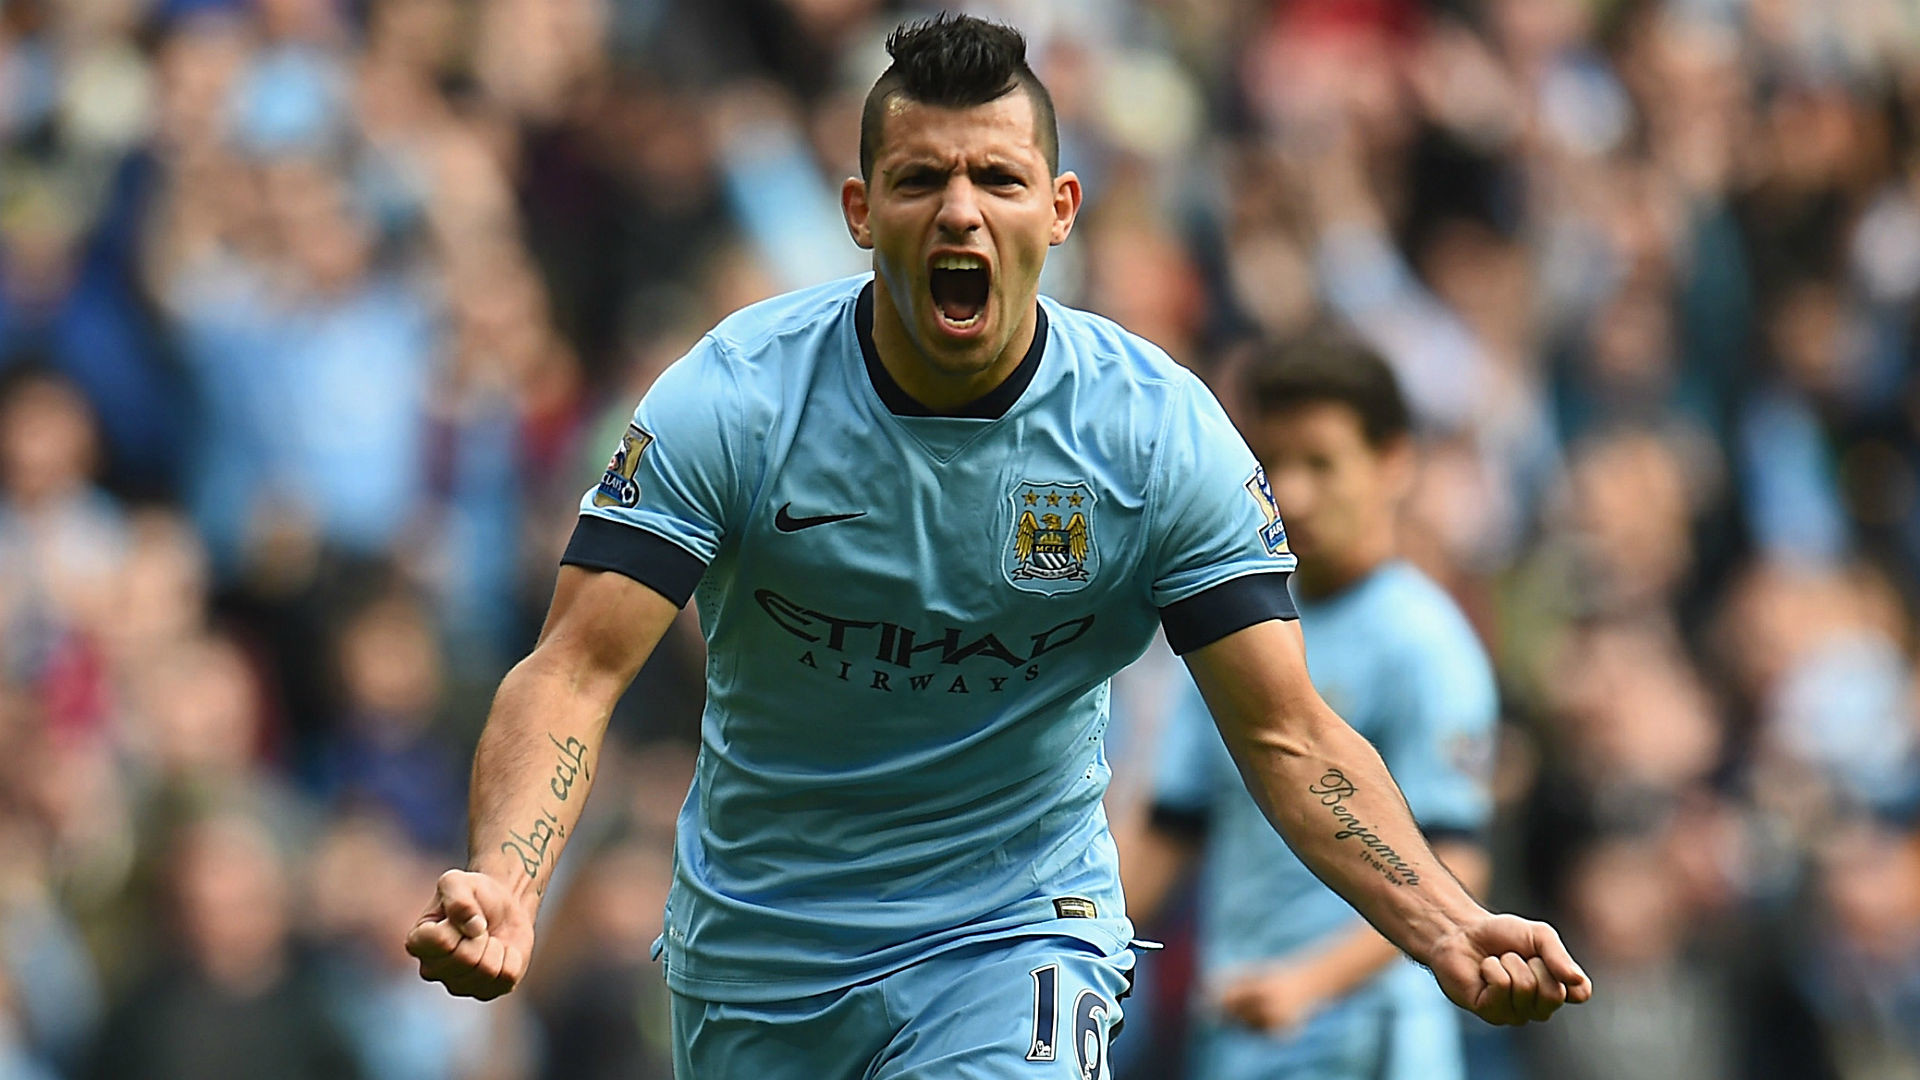 1920x1080 ï»¿But no sooner had Garth Crooks belittled the talents of AgÃ¼ero, he was  immediately singing his praises. 'His third against Watford… really blew me  away and ...